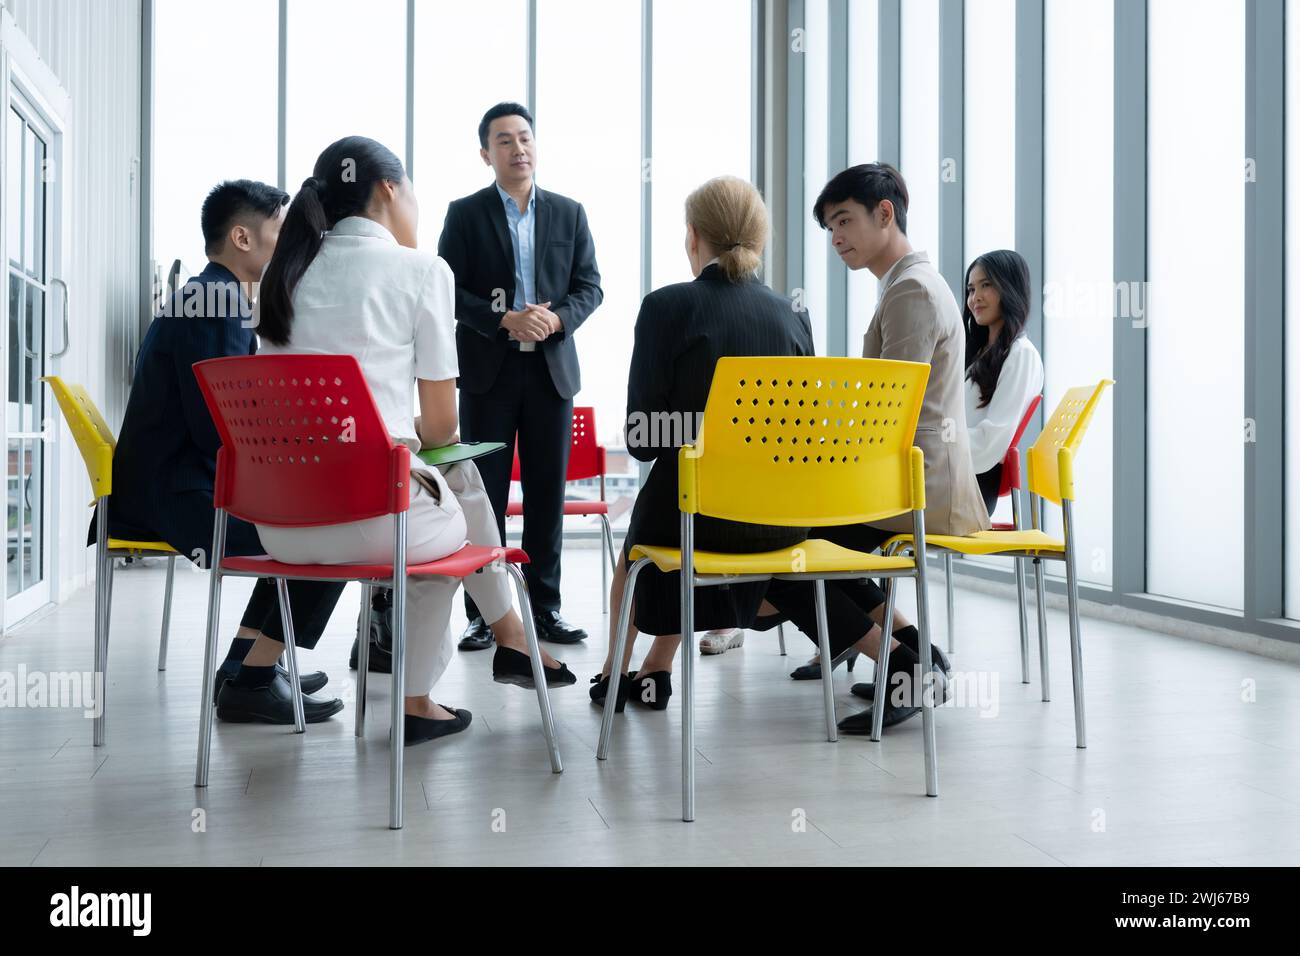 Group of business people meeting in conference room. Business and education concept. Stock Photo